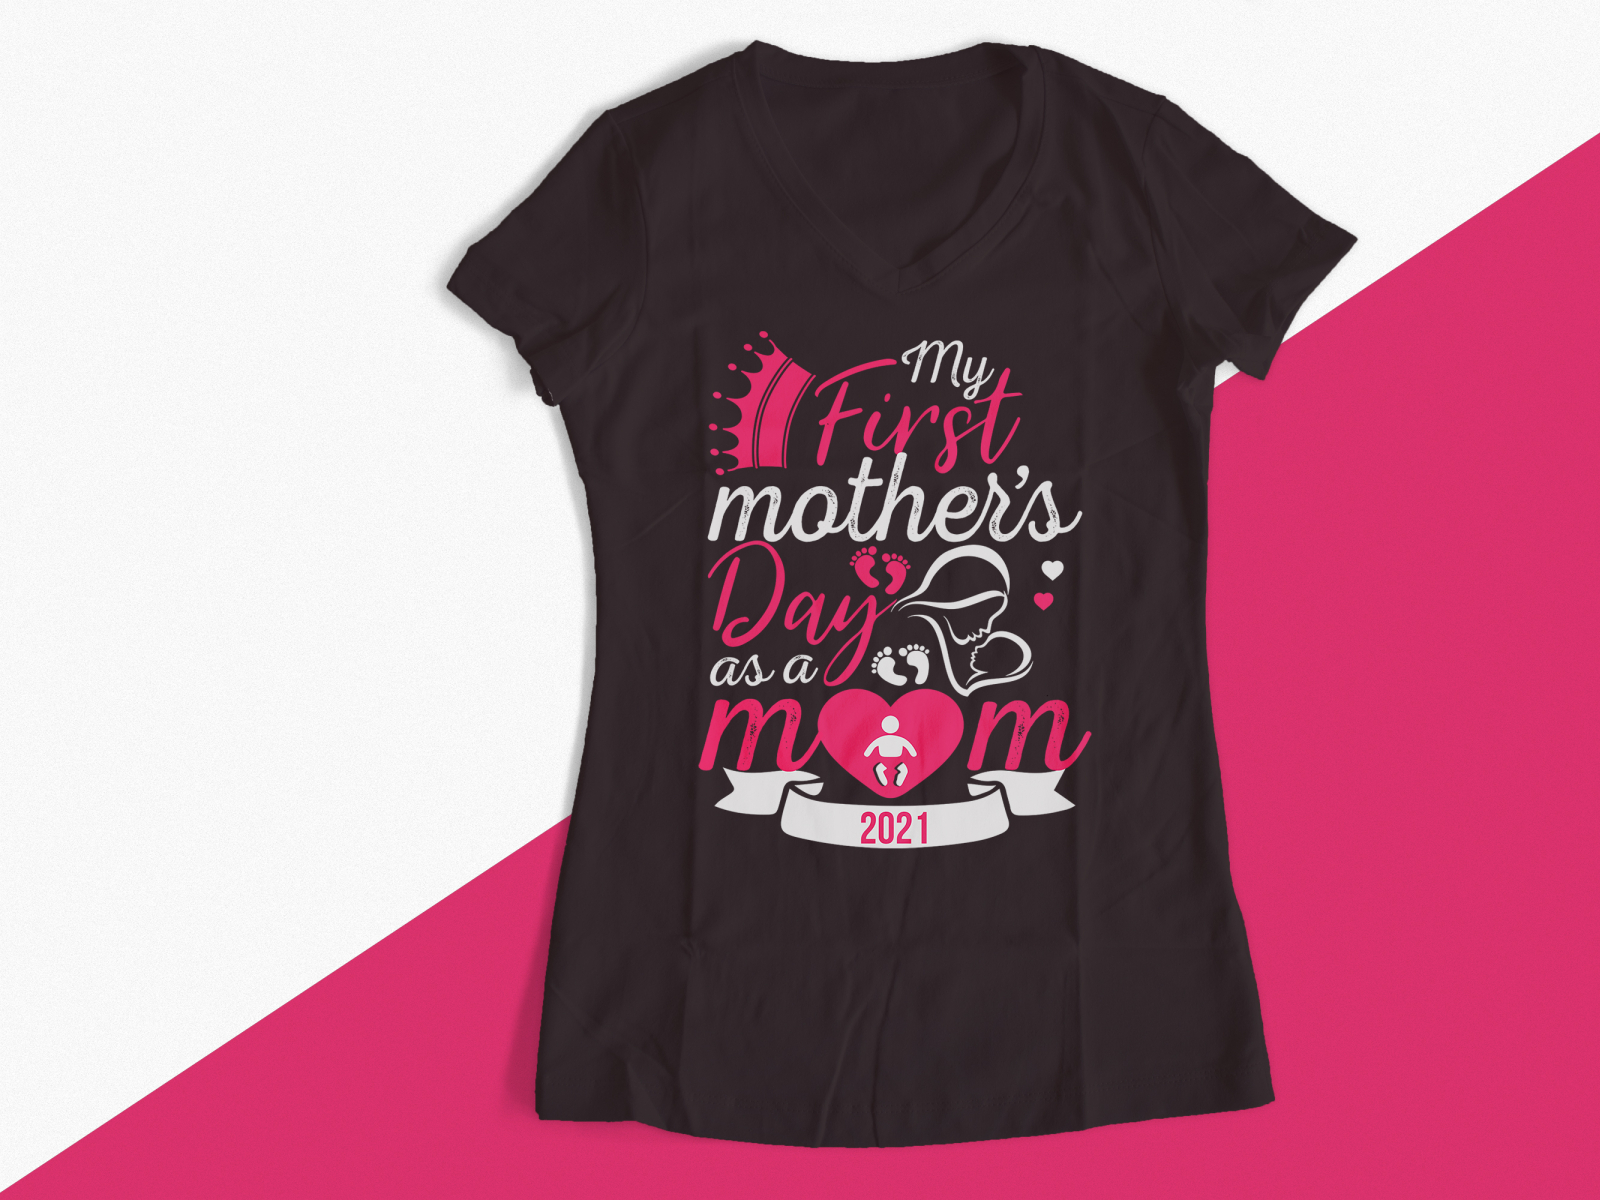 MOM T SHIRT DESIGN by MD.Mahabbuul Haque on Dribbble